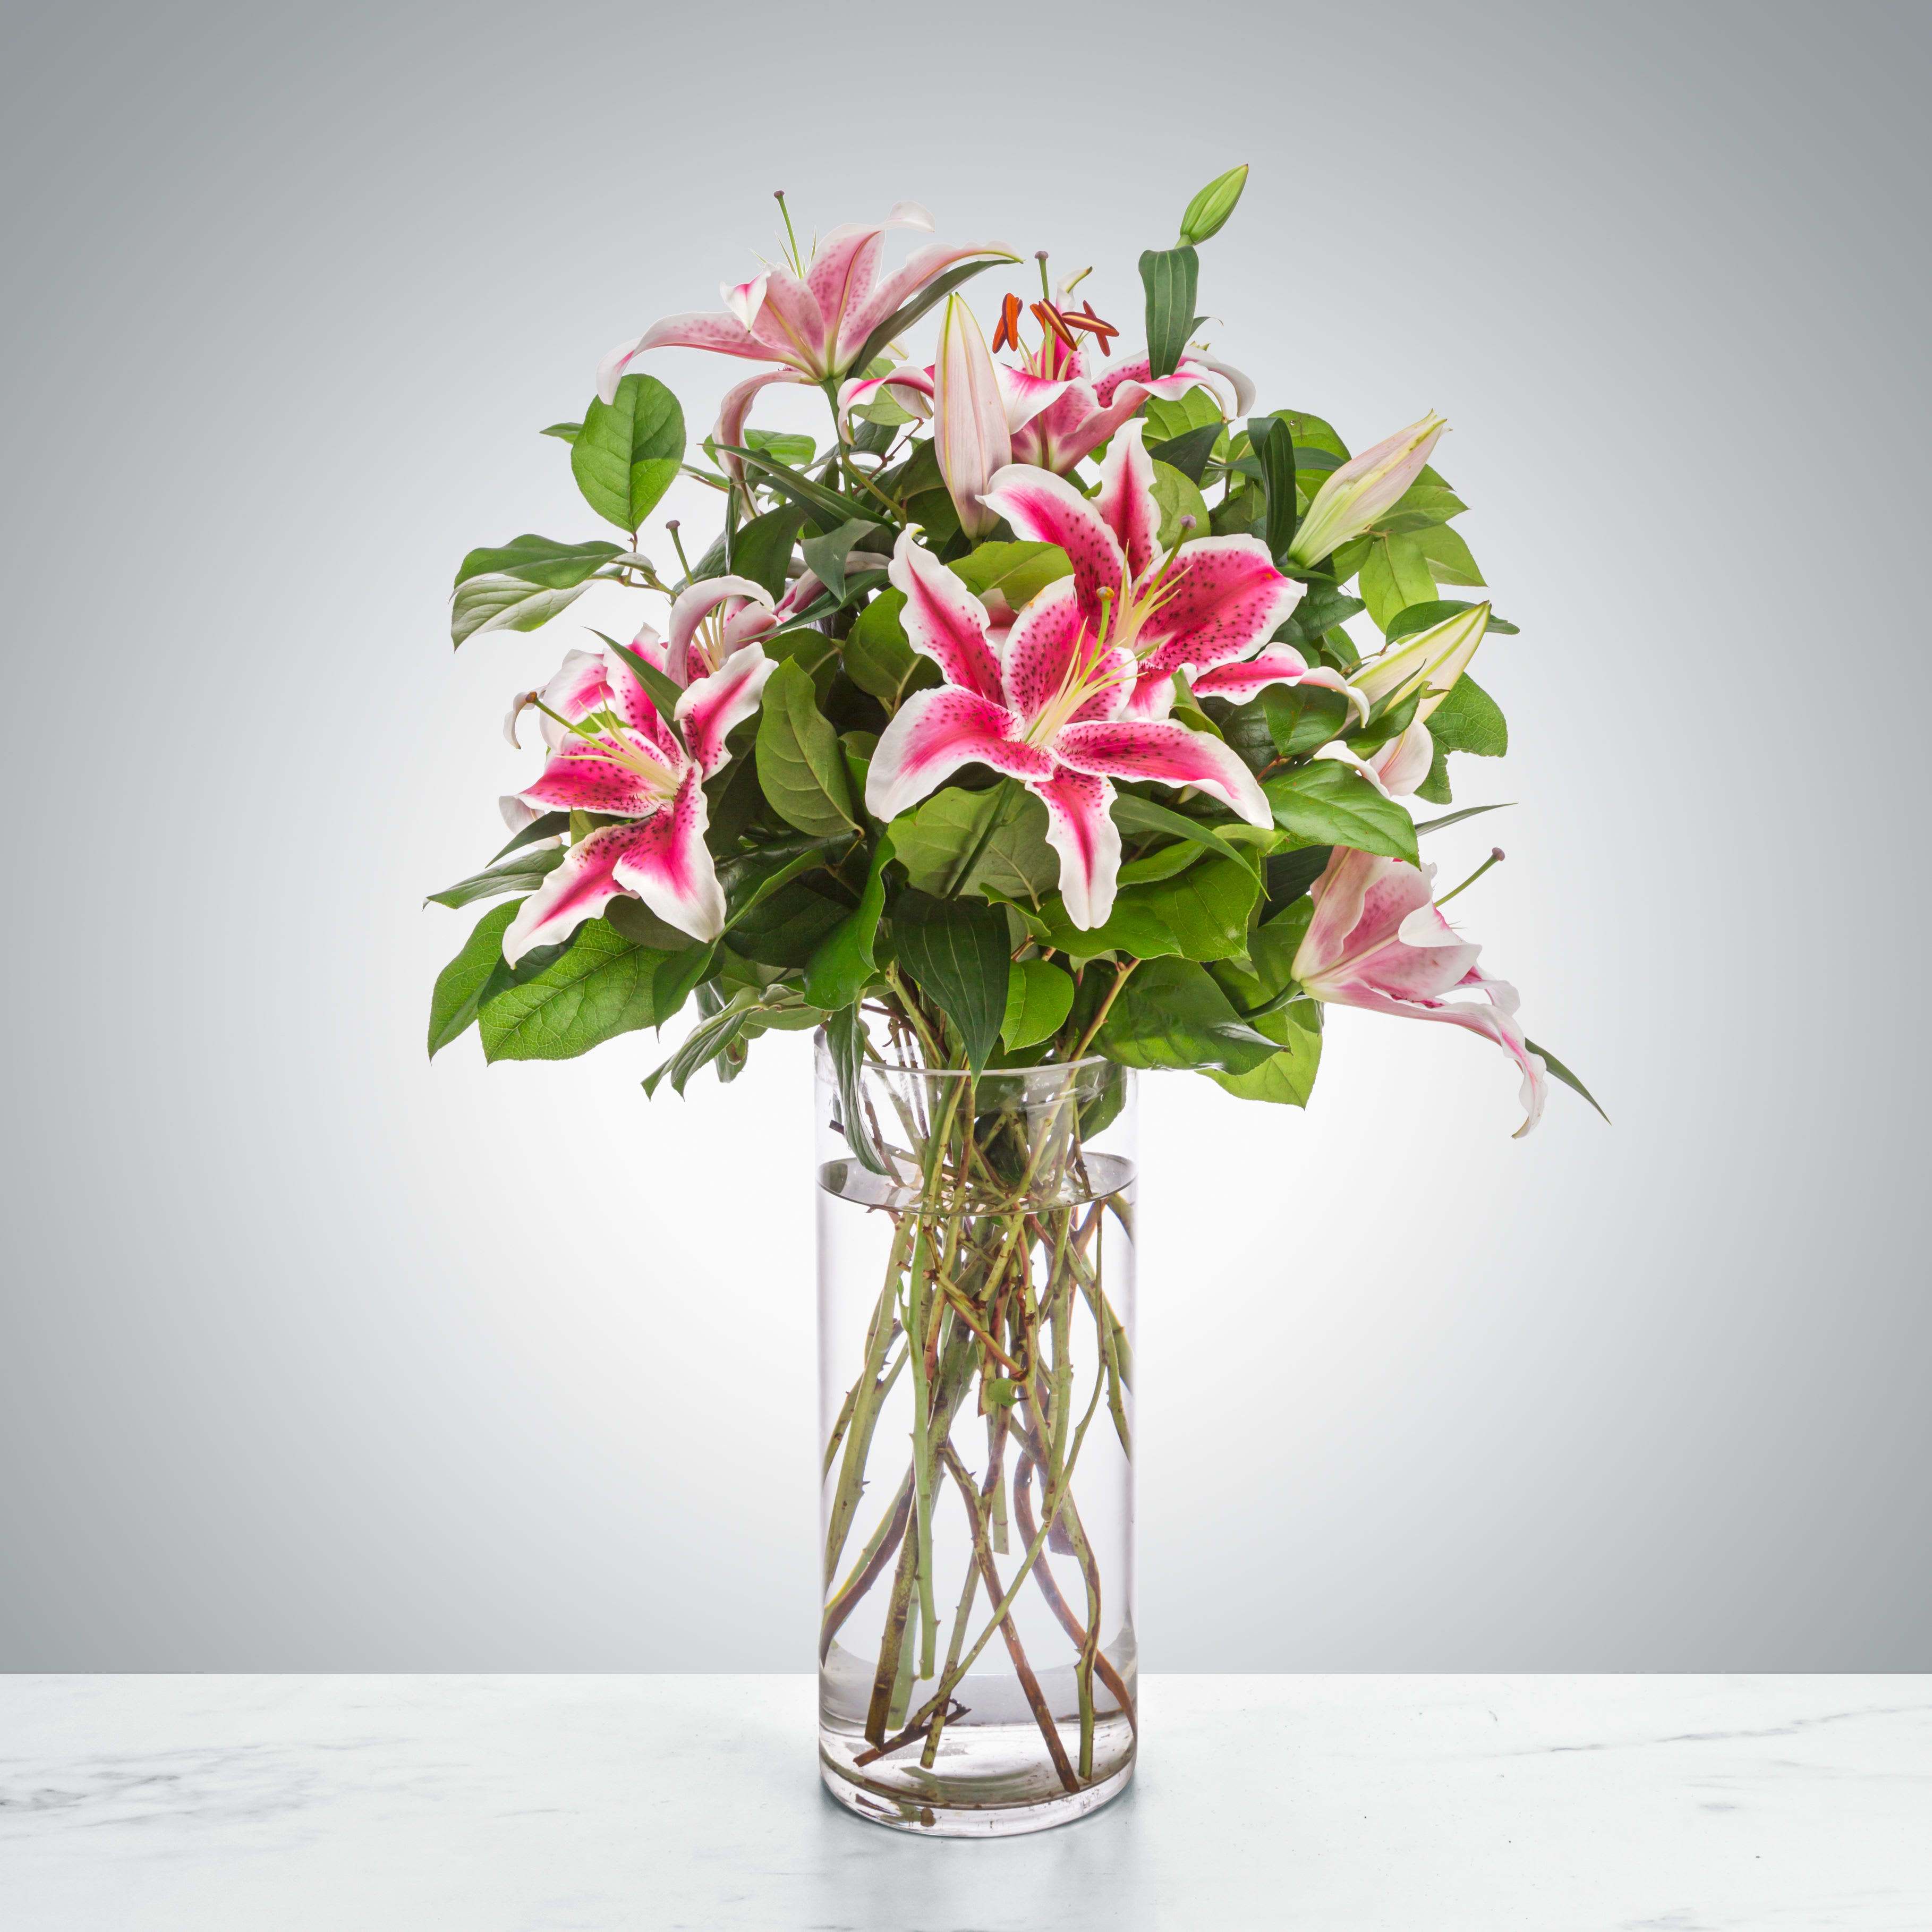 Splendent Stargazers  - Pink lilies stand for love, admiration, compassion, and femininity. Send this sweet-smelling lily arrangement for Mother's Day, Women's Day, or an Anniversary.  1st Image: Standard 2nd Image: Premium